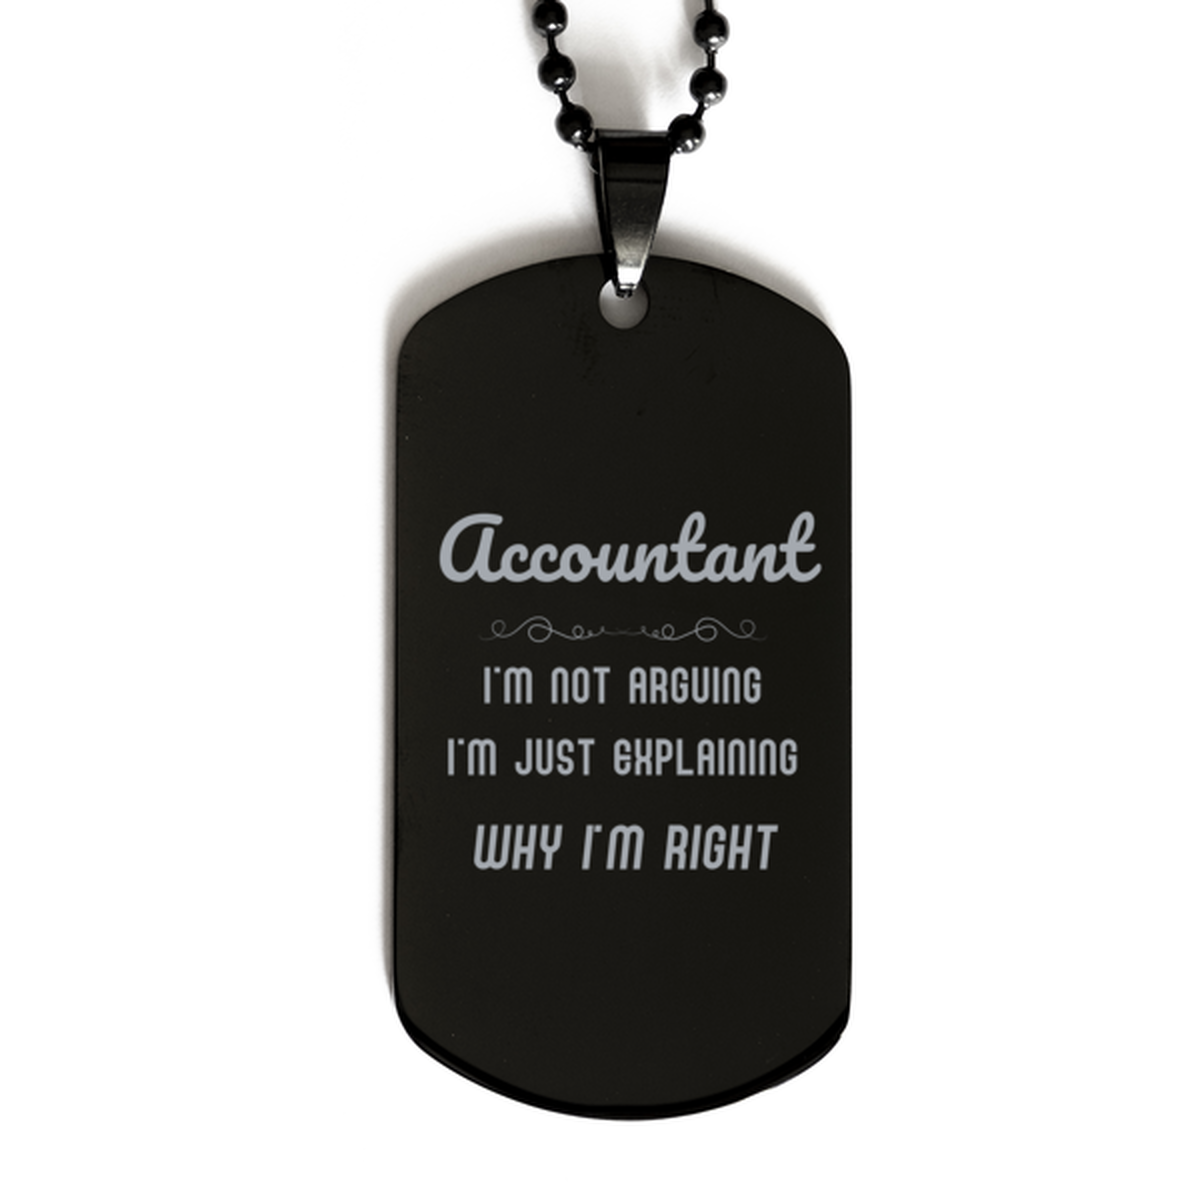 Accountant I'm not Arguing. I'm Just Explaining Why I'm RIGHT Black Dog Tag, Funny Saying Quote Accountant Gifts For Accountant Graduation Birthday Christmas Gifts for Men Women Coworker